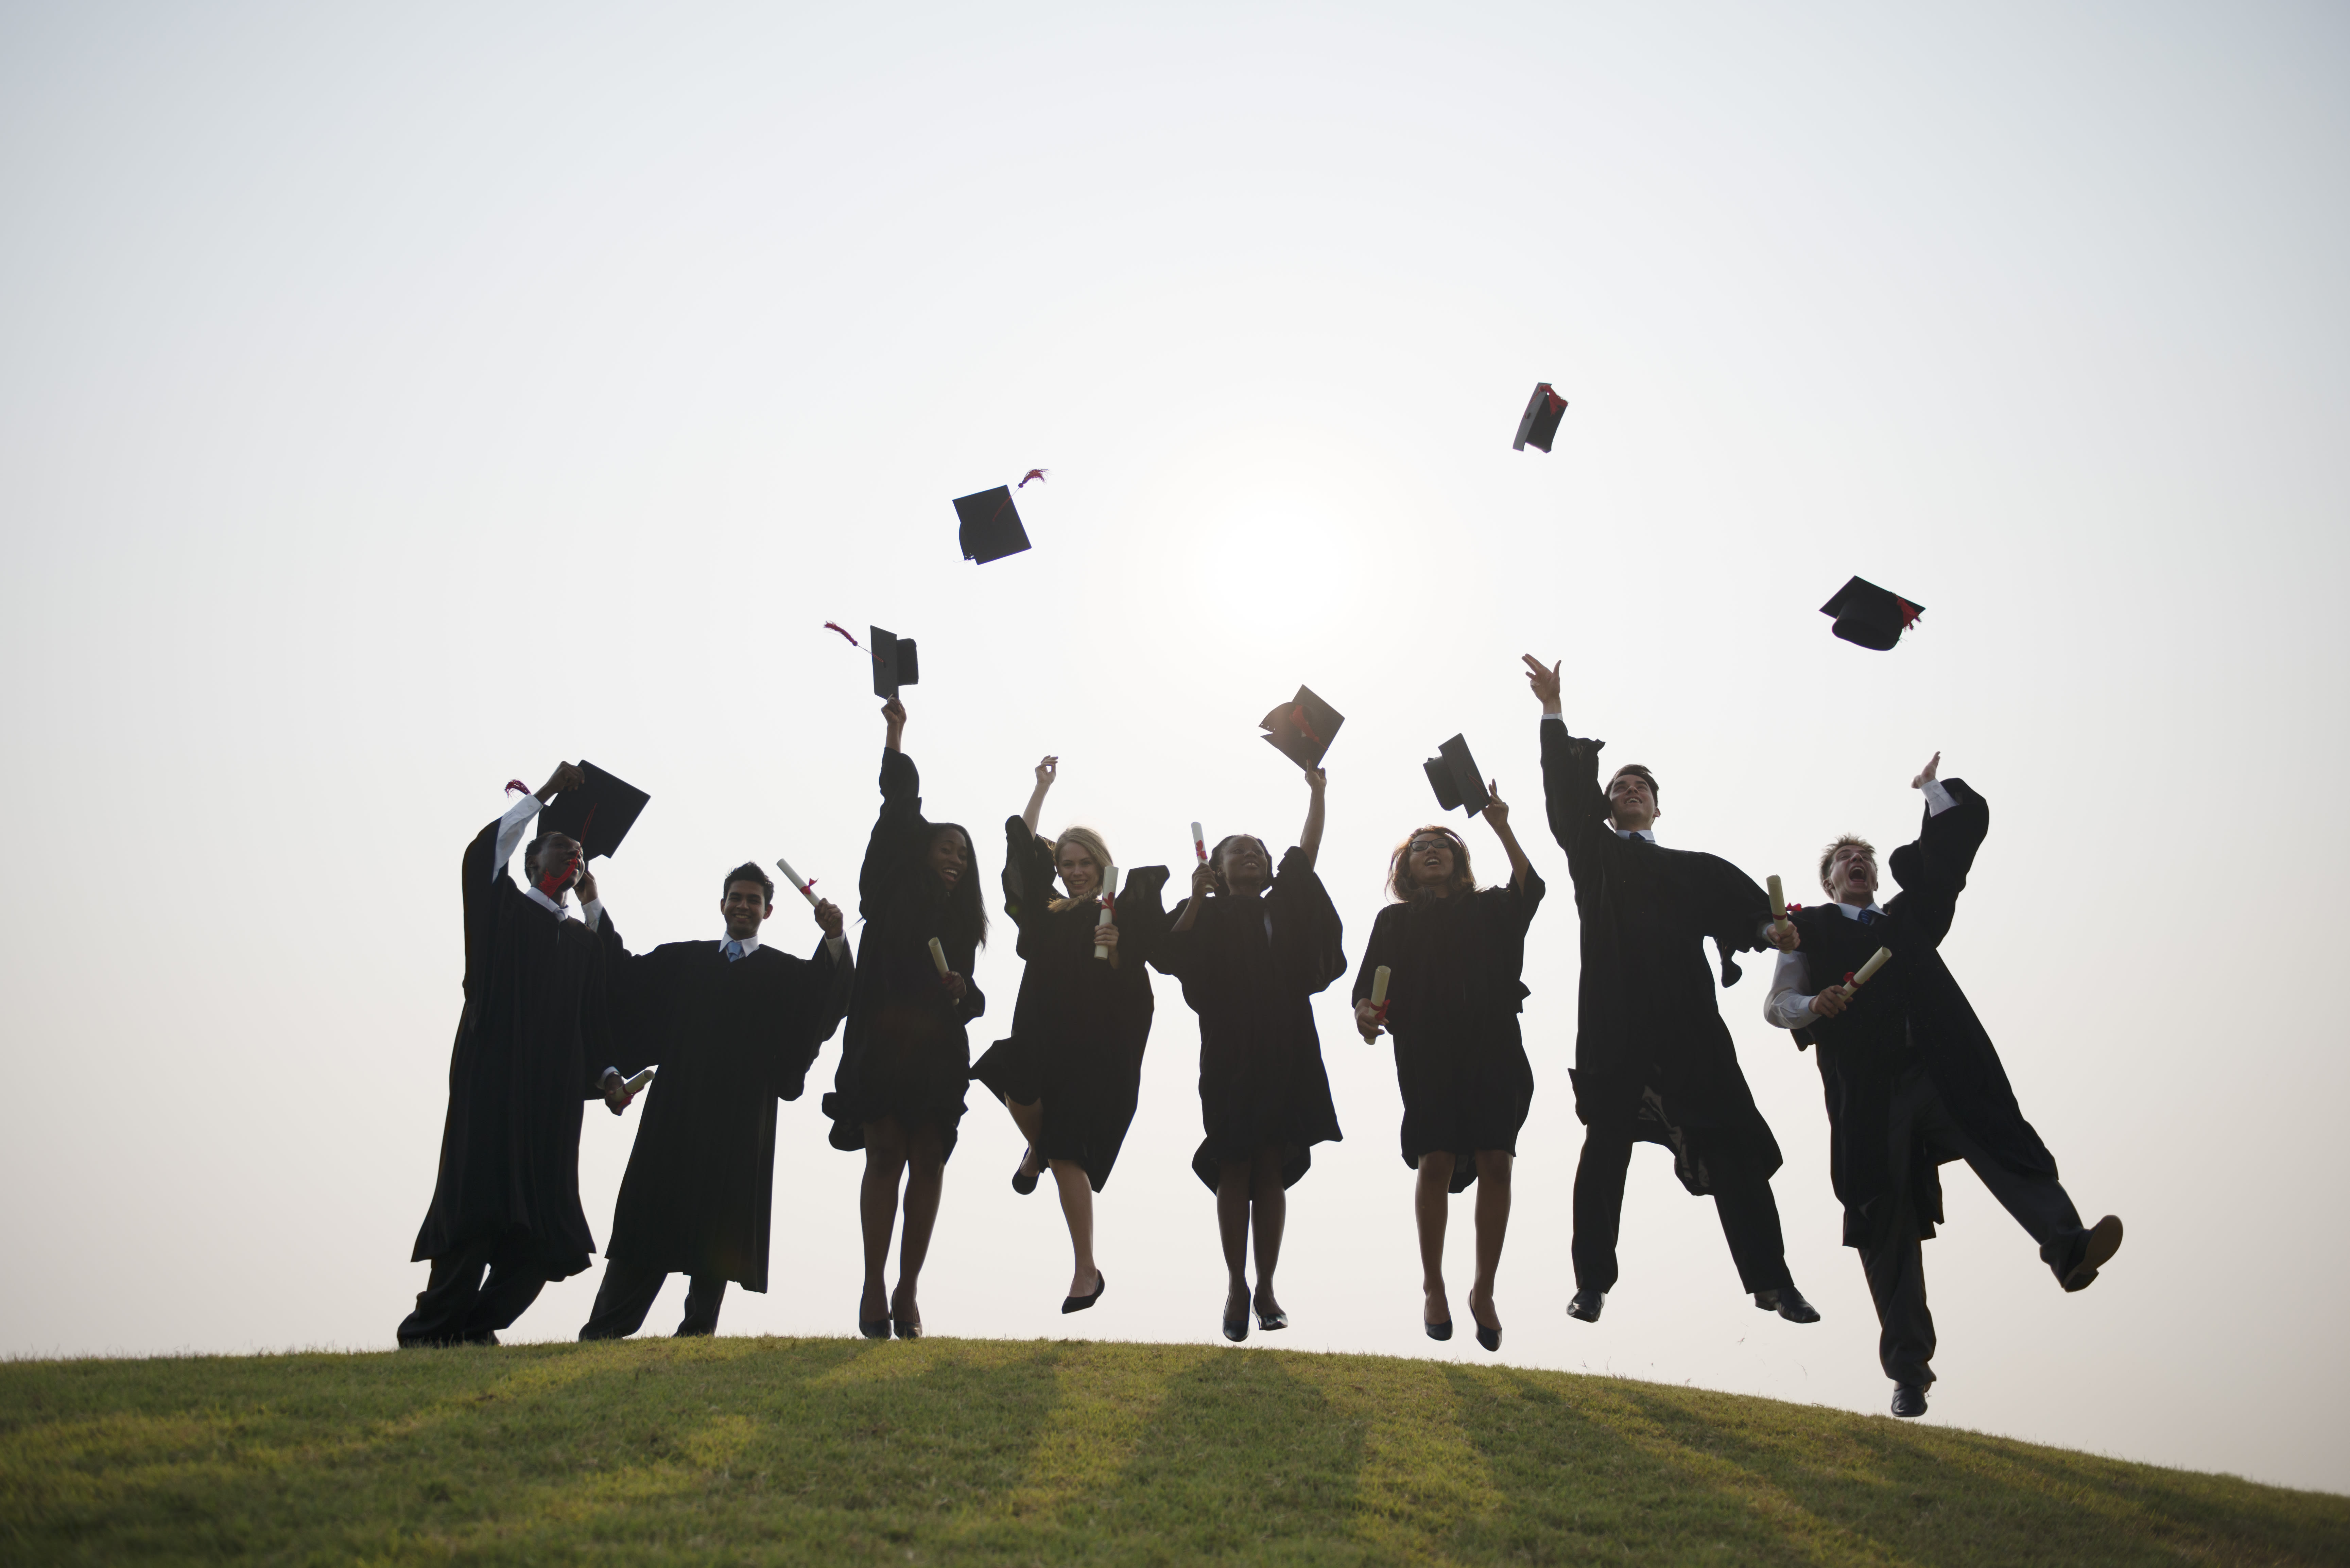 Graduates jumping in a field with cap and gown